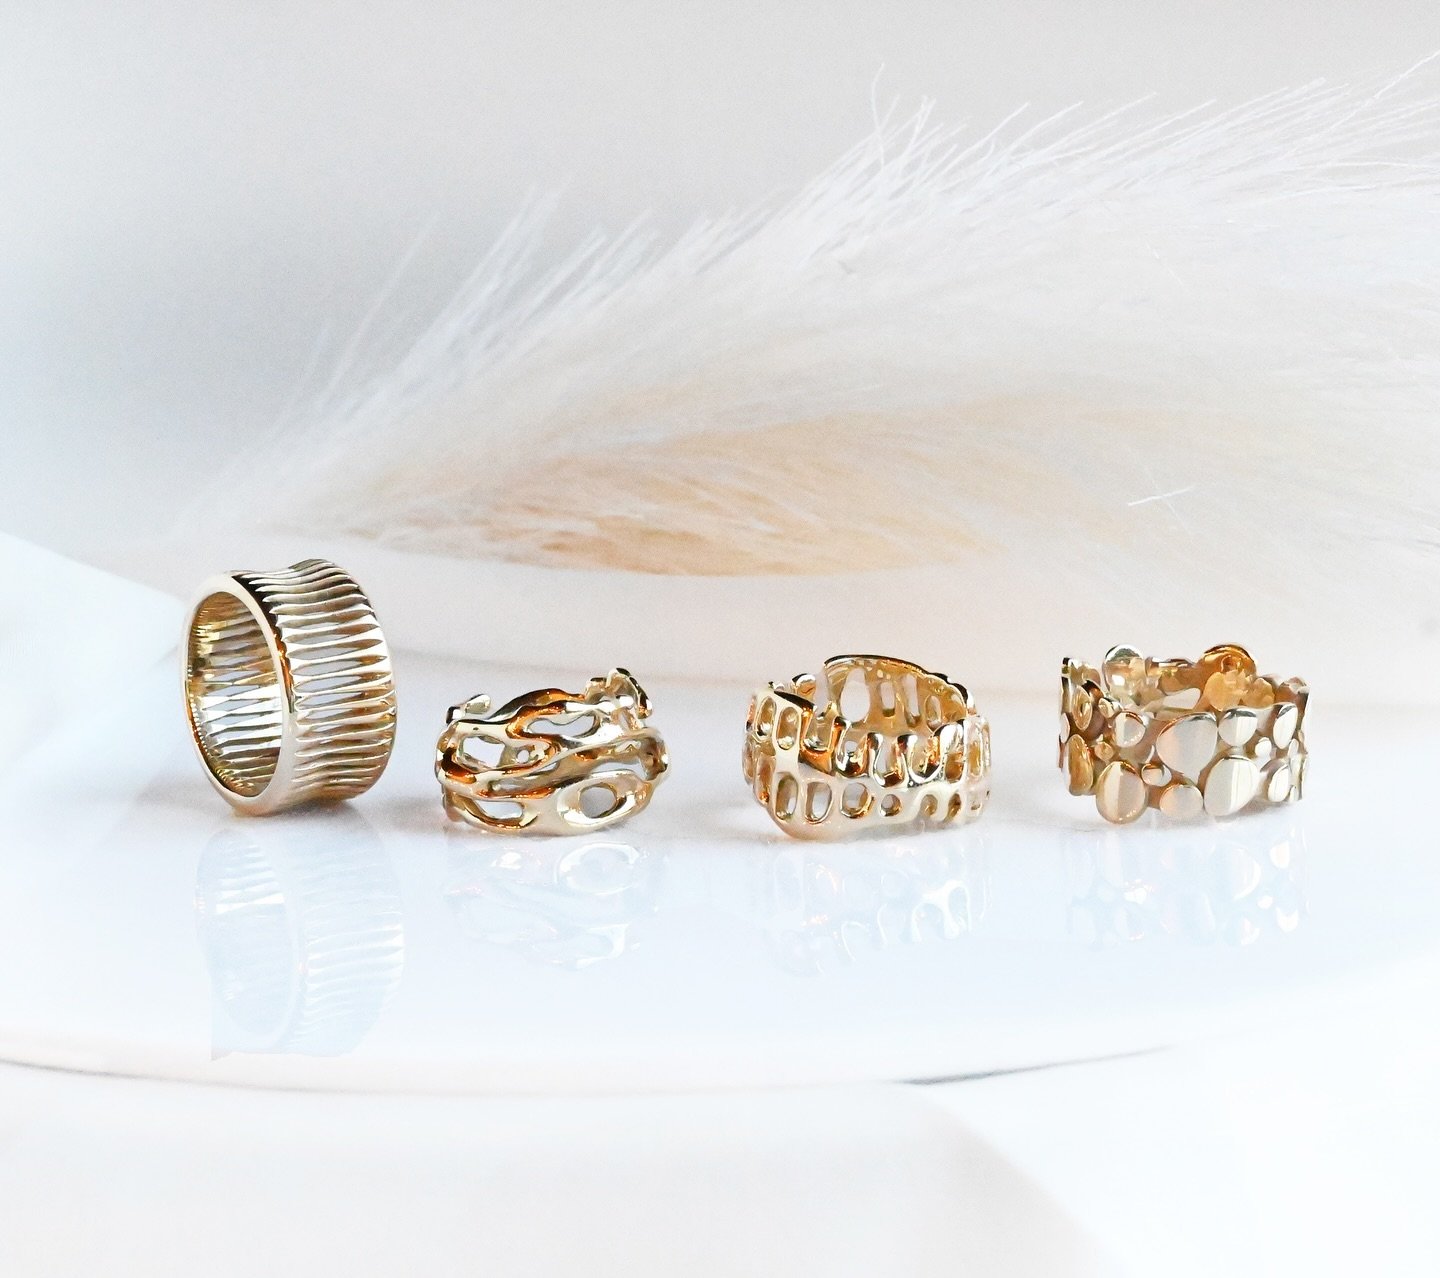 Make Mother&rsquo;s Day unforgettable with a statement ring as unique as she is. Our cigar bands are the perfect rings to reflect her strength and beauty. Explore our collection and find the perfect statement piece to celebrate mom. 

#goldrings #sta